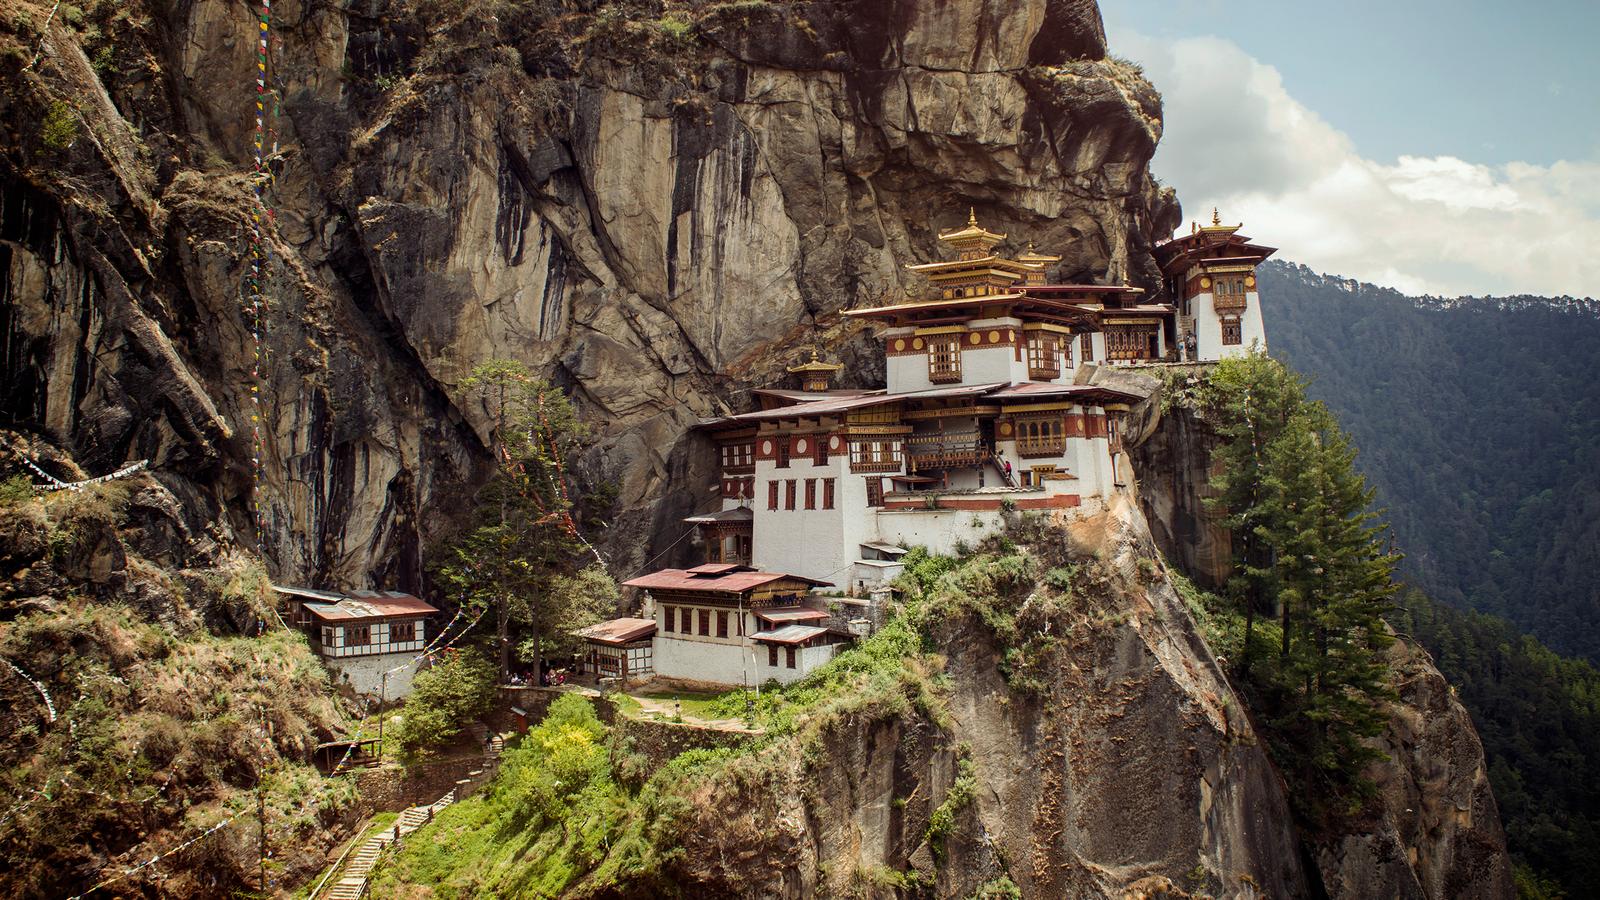 How does religion affect the Bhutanese people’s daily lives?